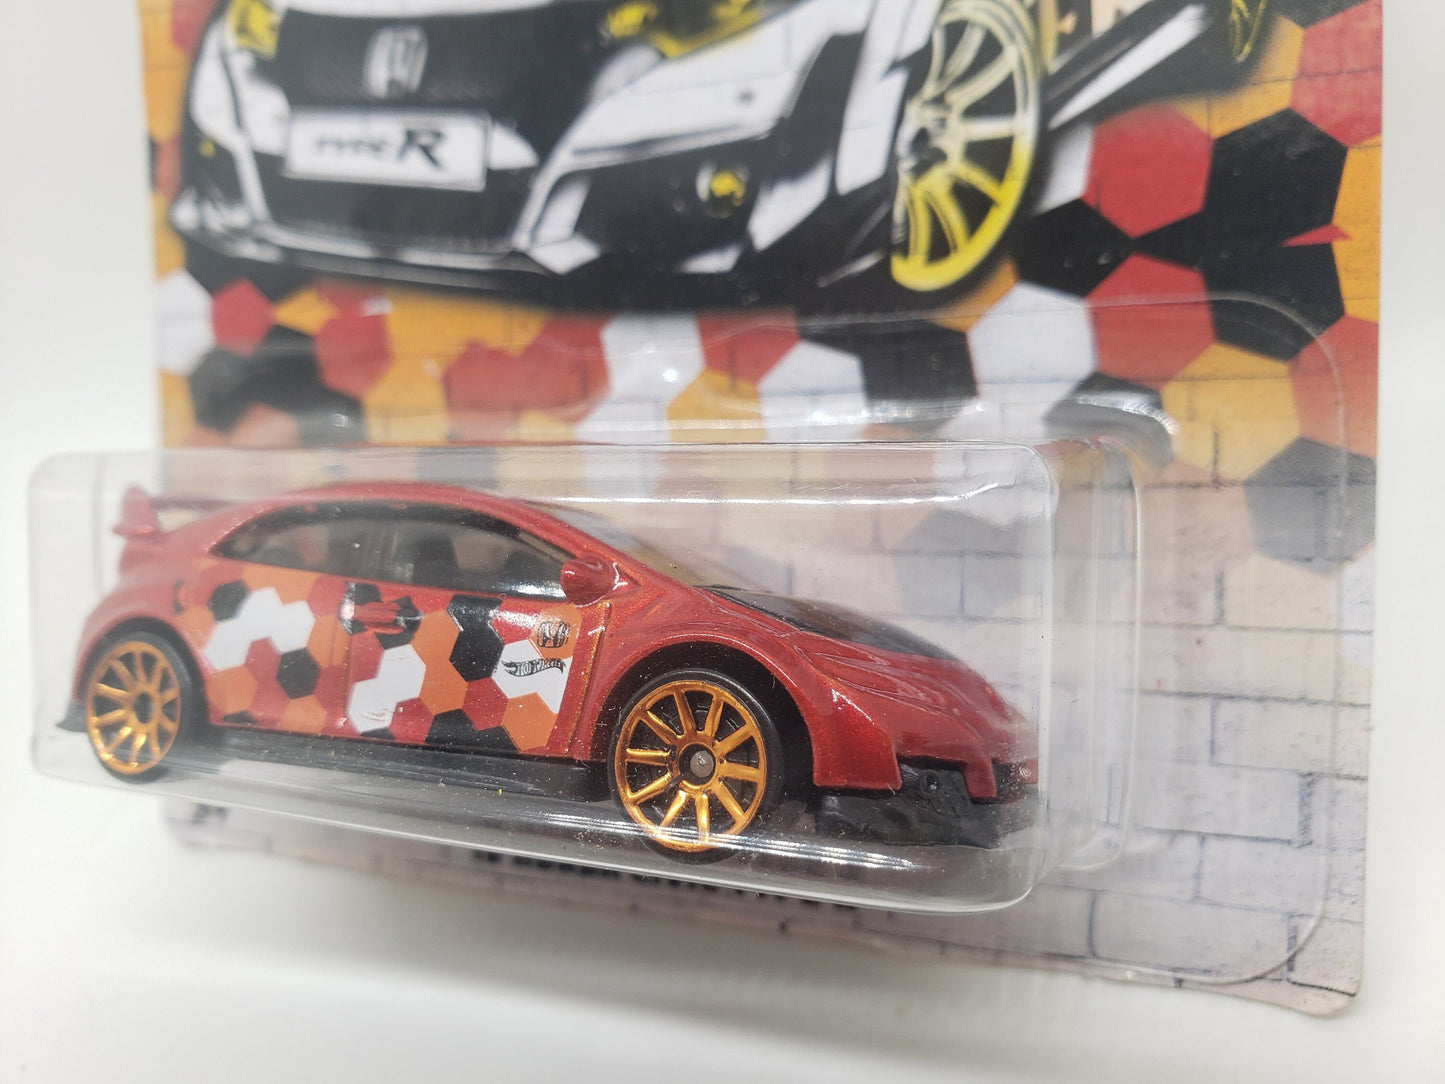 Hot Wheels 16 Honda Civic Type R Metalflake Orange Urban Camouflage Miniature Collectable Scale Model Toy Car Perfect Birthday Gift